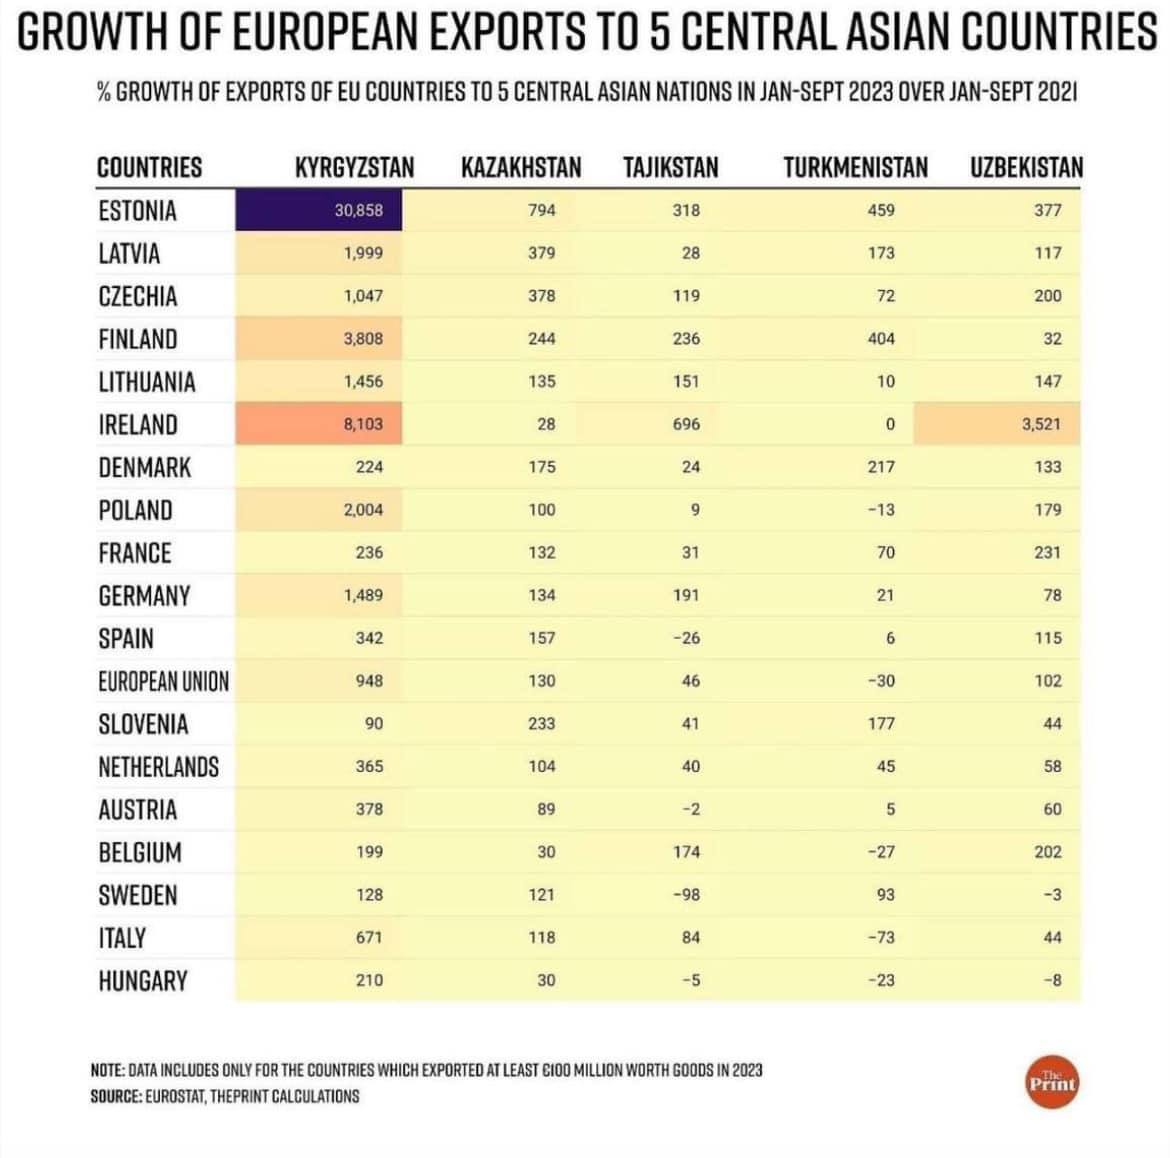 #European trade shifts eastward! A significant surge in exports from EU countries to Central Asia marks a new economic trend. From January to September 2023, countries like Ireland and Estonia lead with exponential growth, diversifying their trade relationships. #TradeTrends